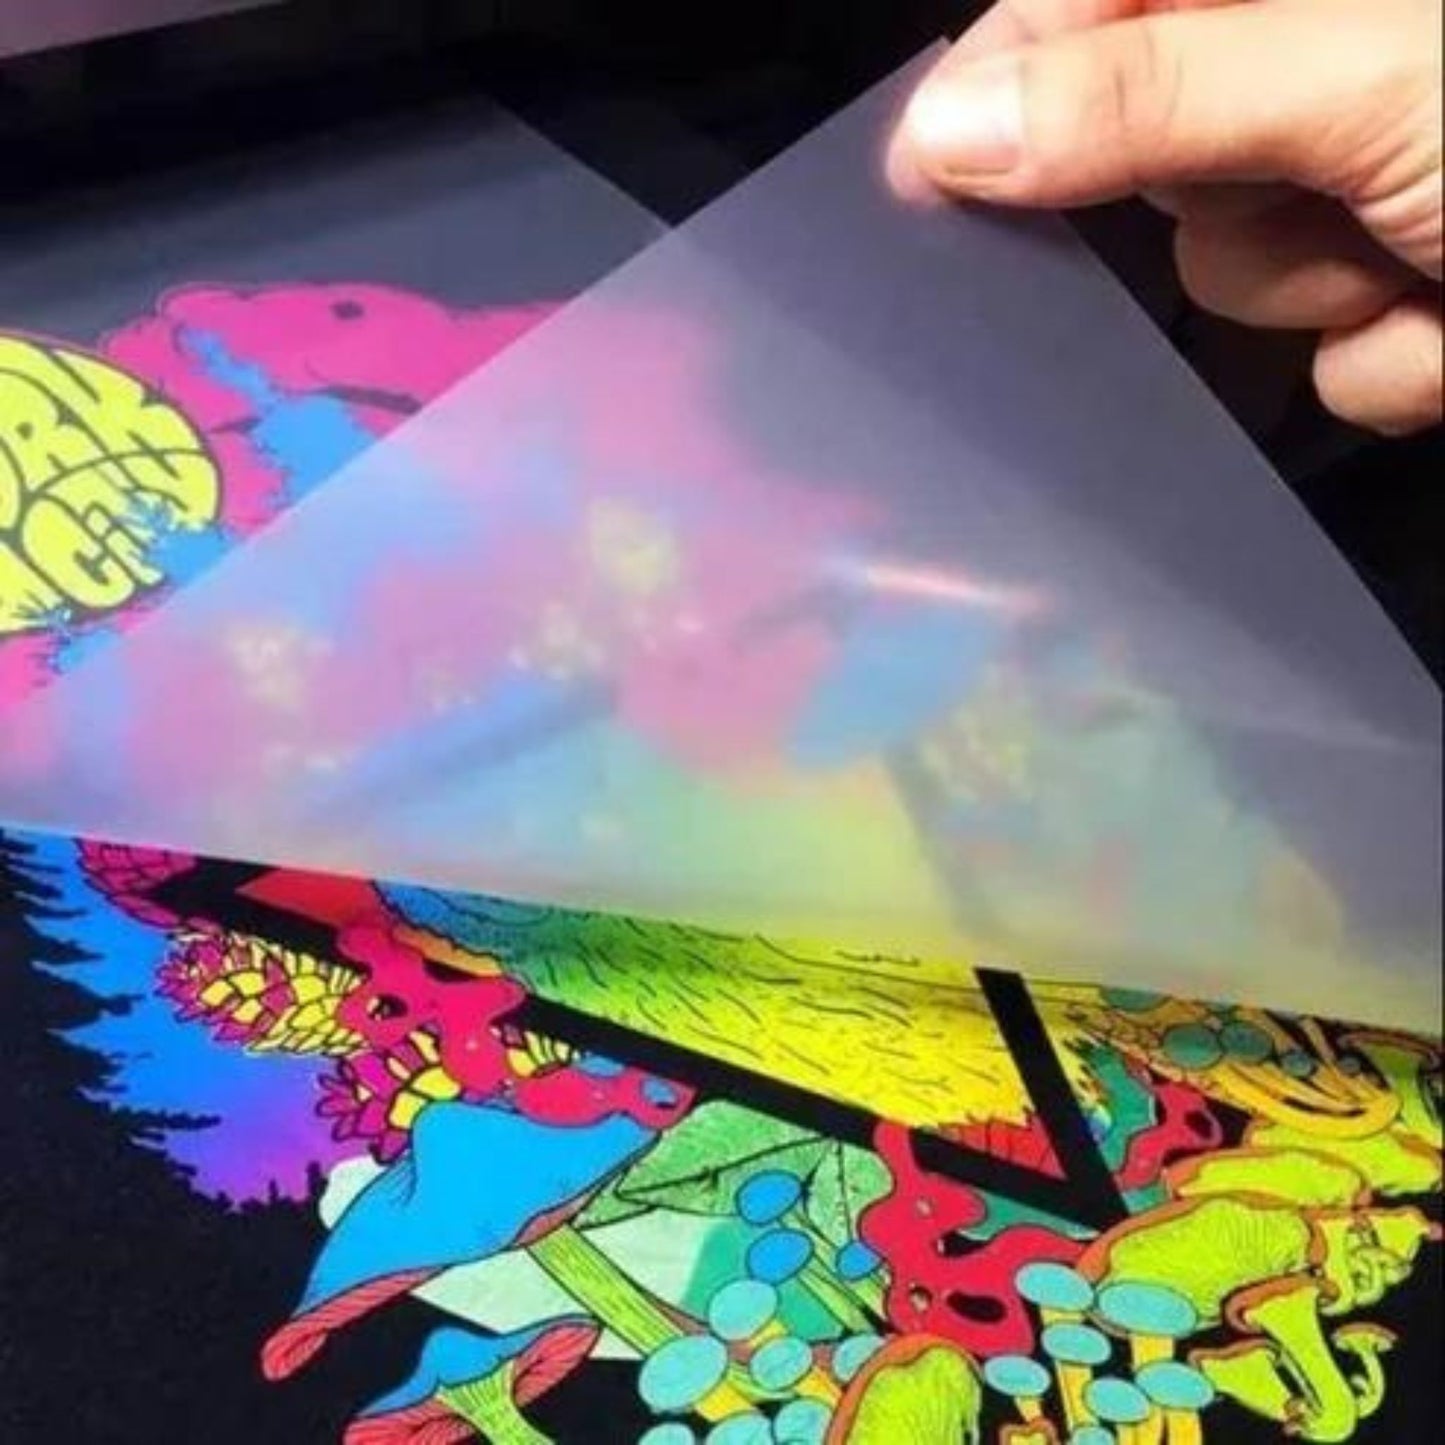 A person lifts a semi-transparent sheet to reveal a multicolored, psychedelic design featuring various abstract shapes and vibrant colors